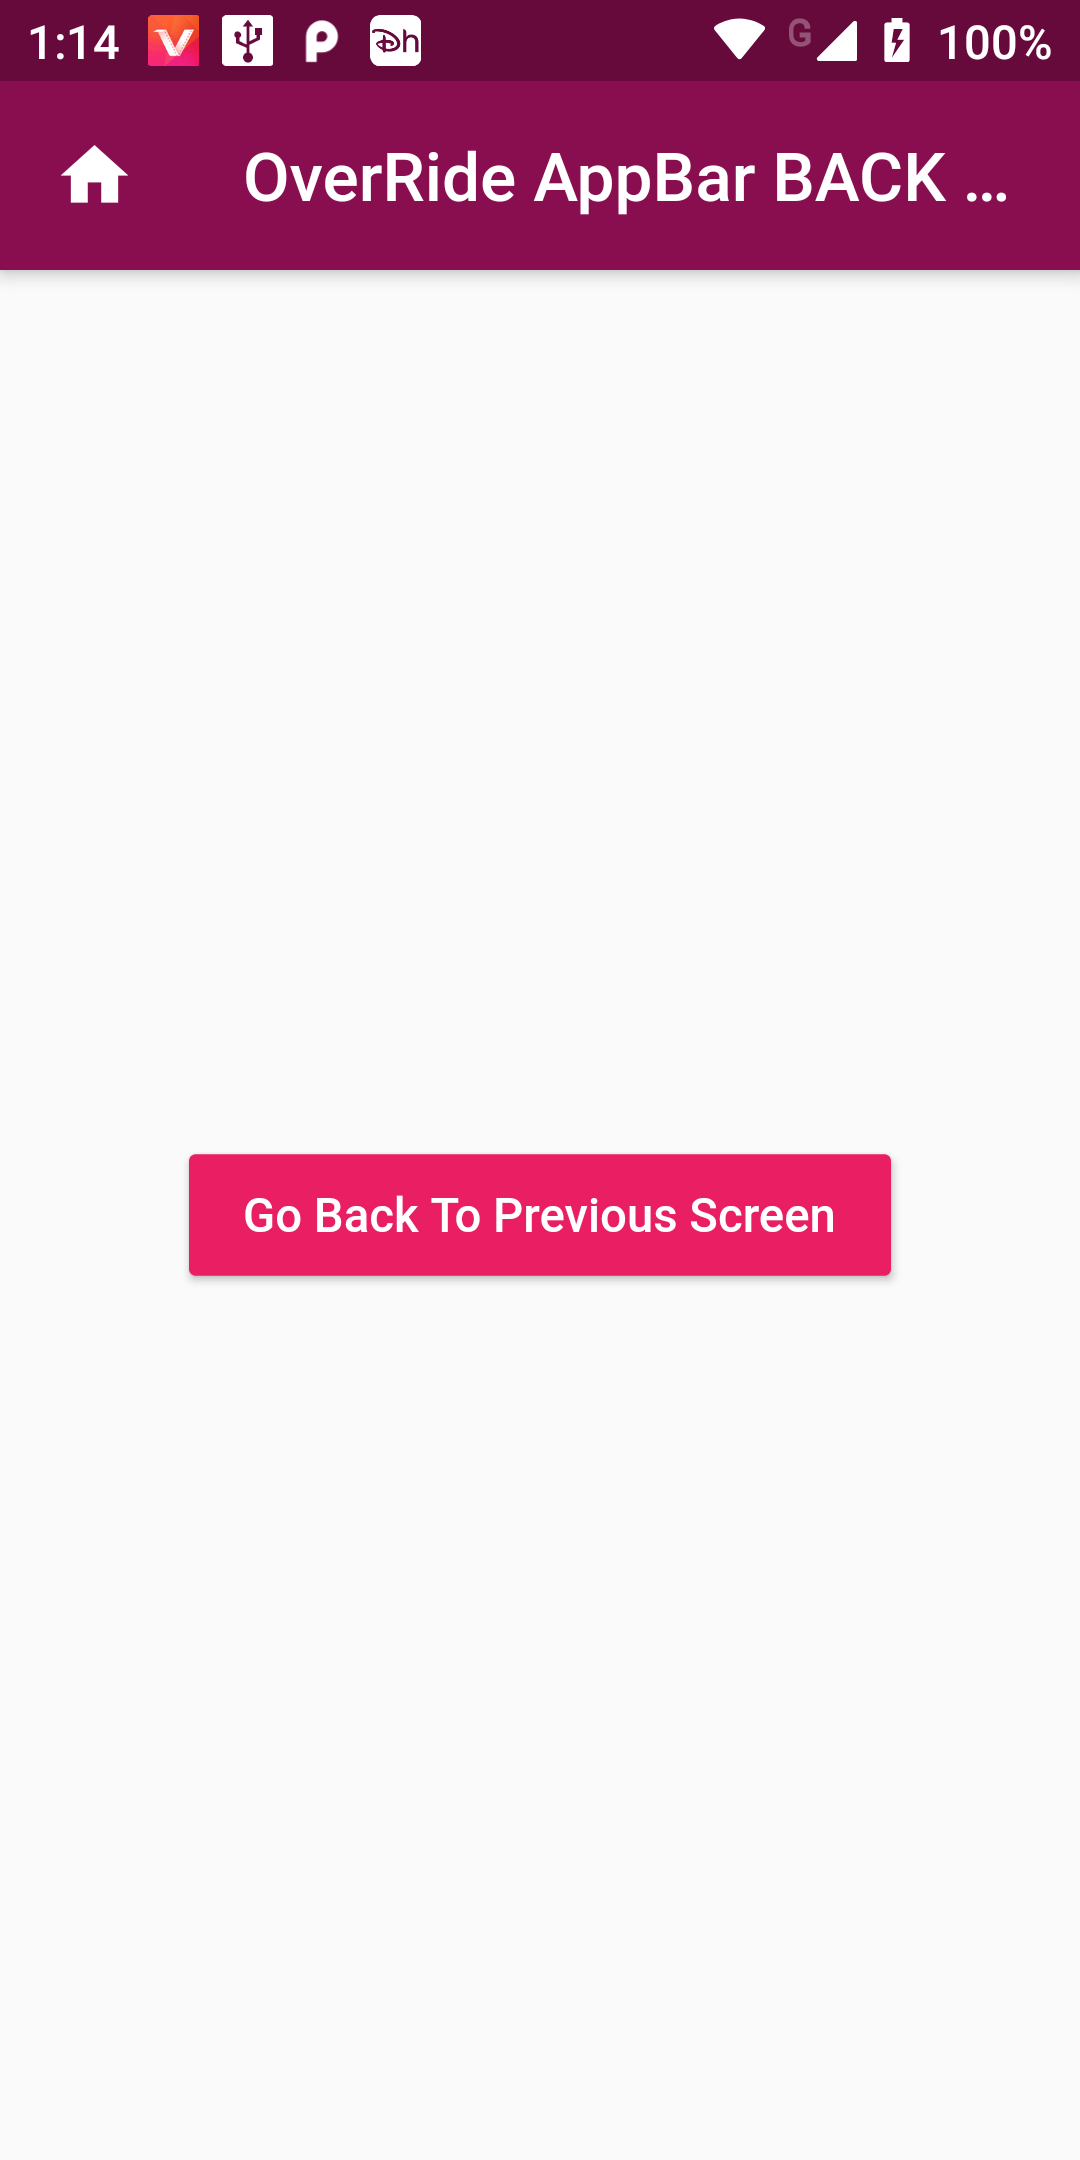 replace-override-app0bar-back-button-in-flutter-android